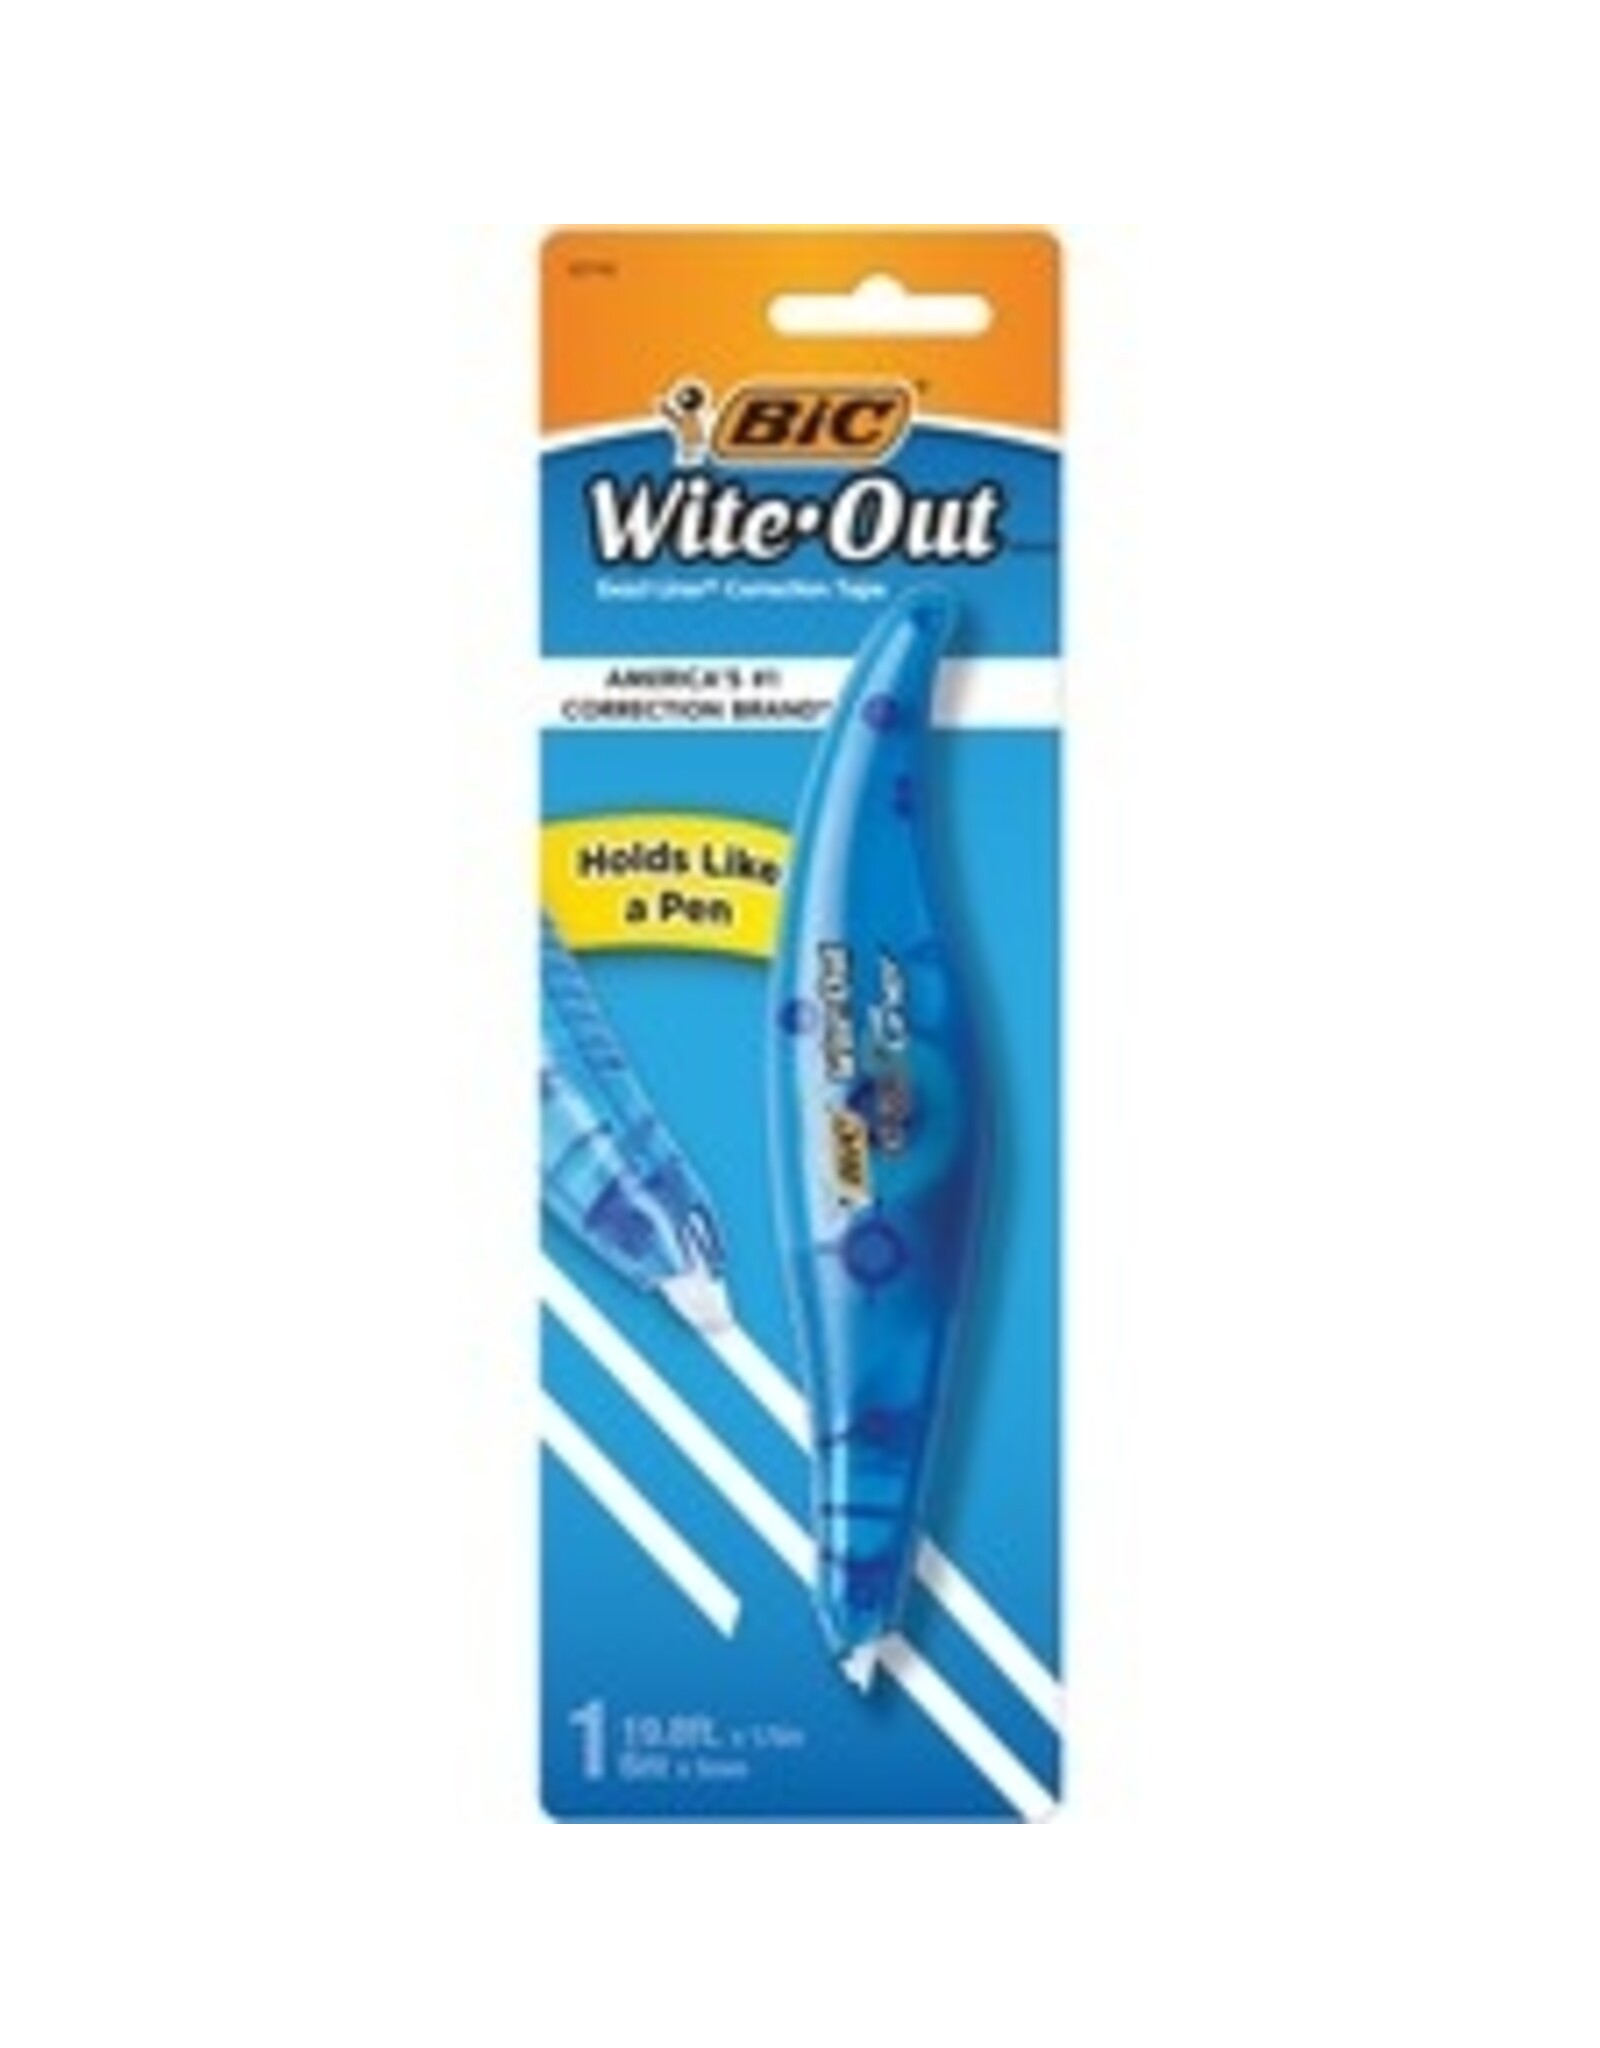 WITE-OUT, EXACT LINER